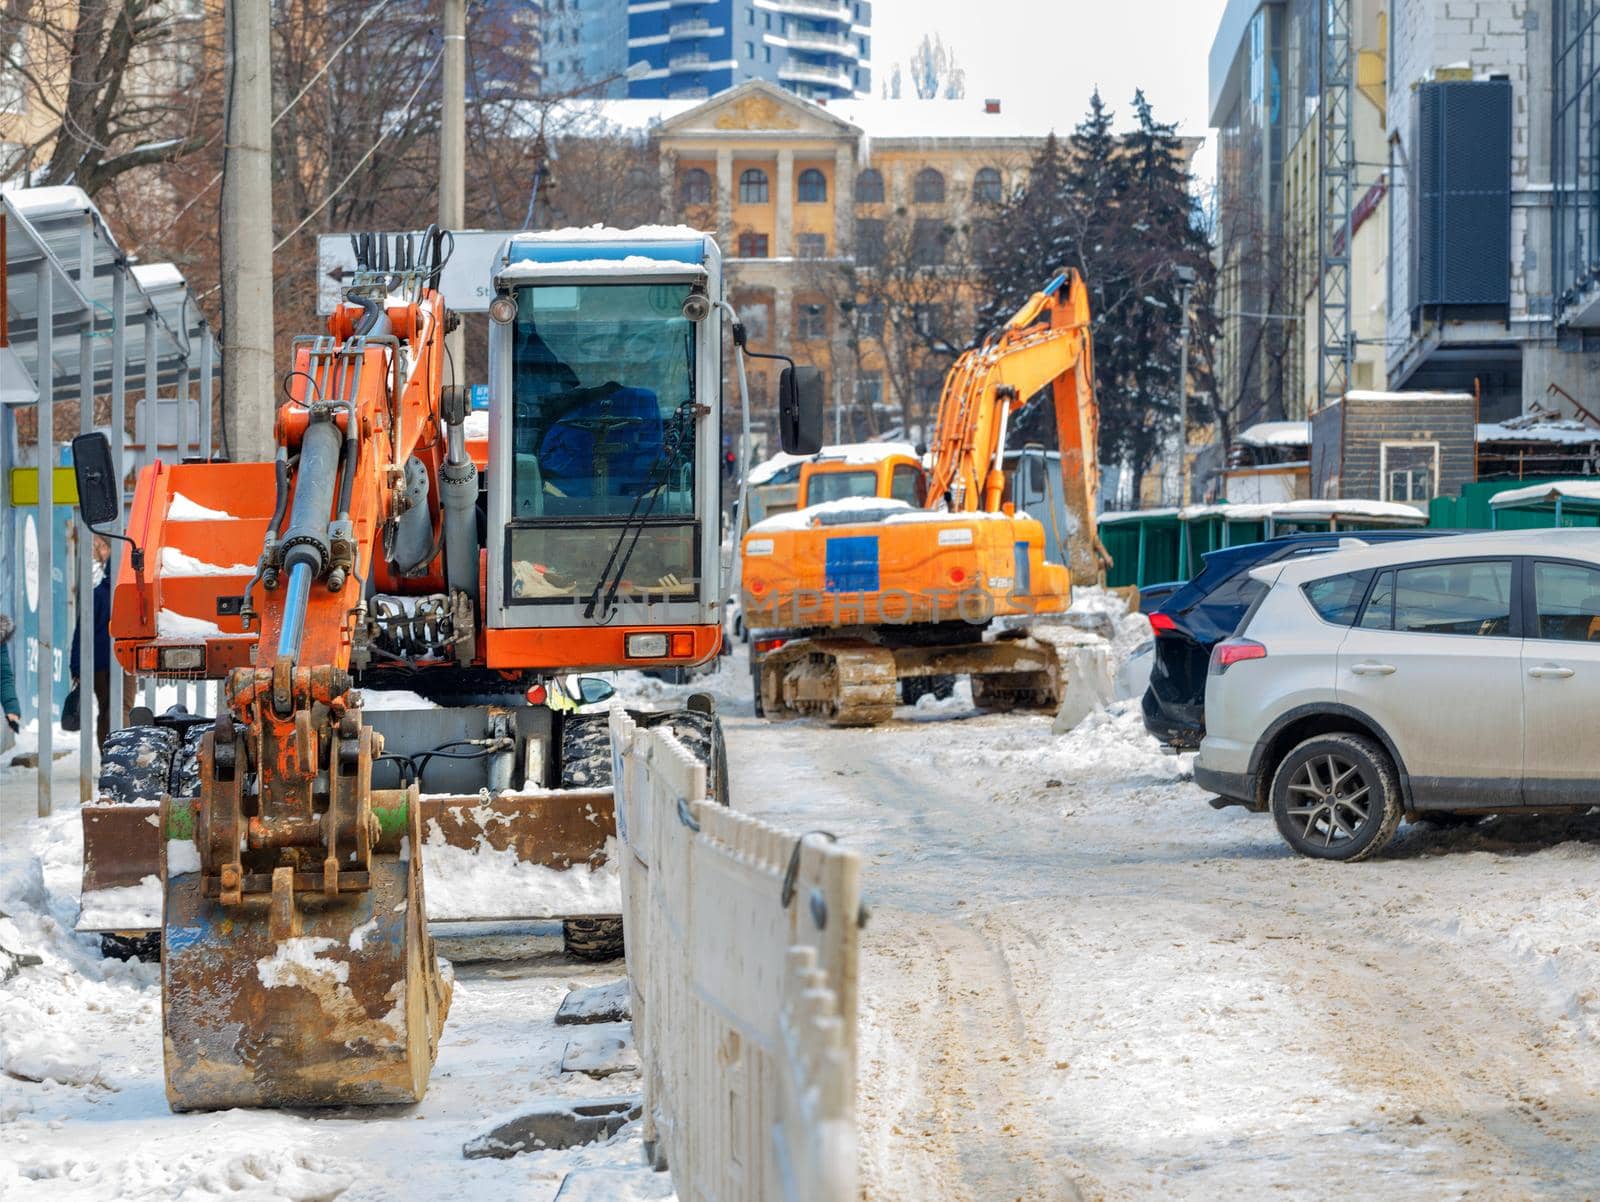 Powerful construction equipment, construction excavators, focused on clearing the city street from snow. by Sergii